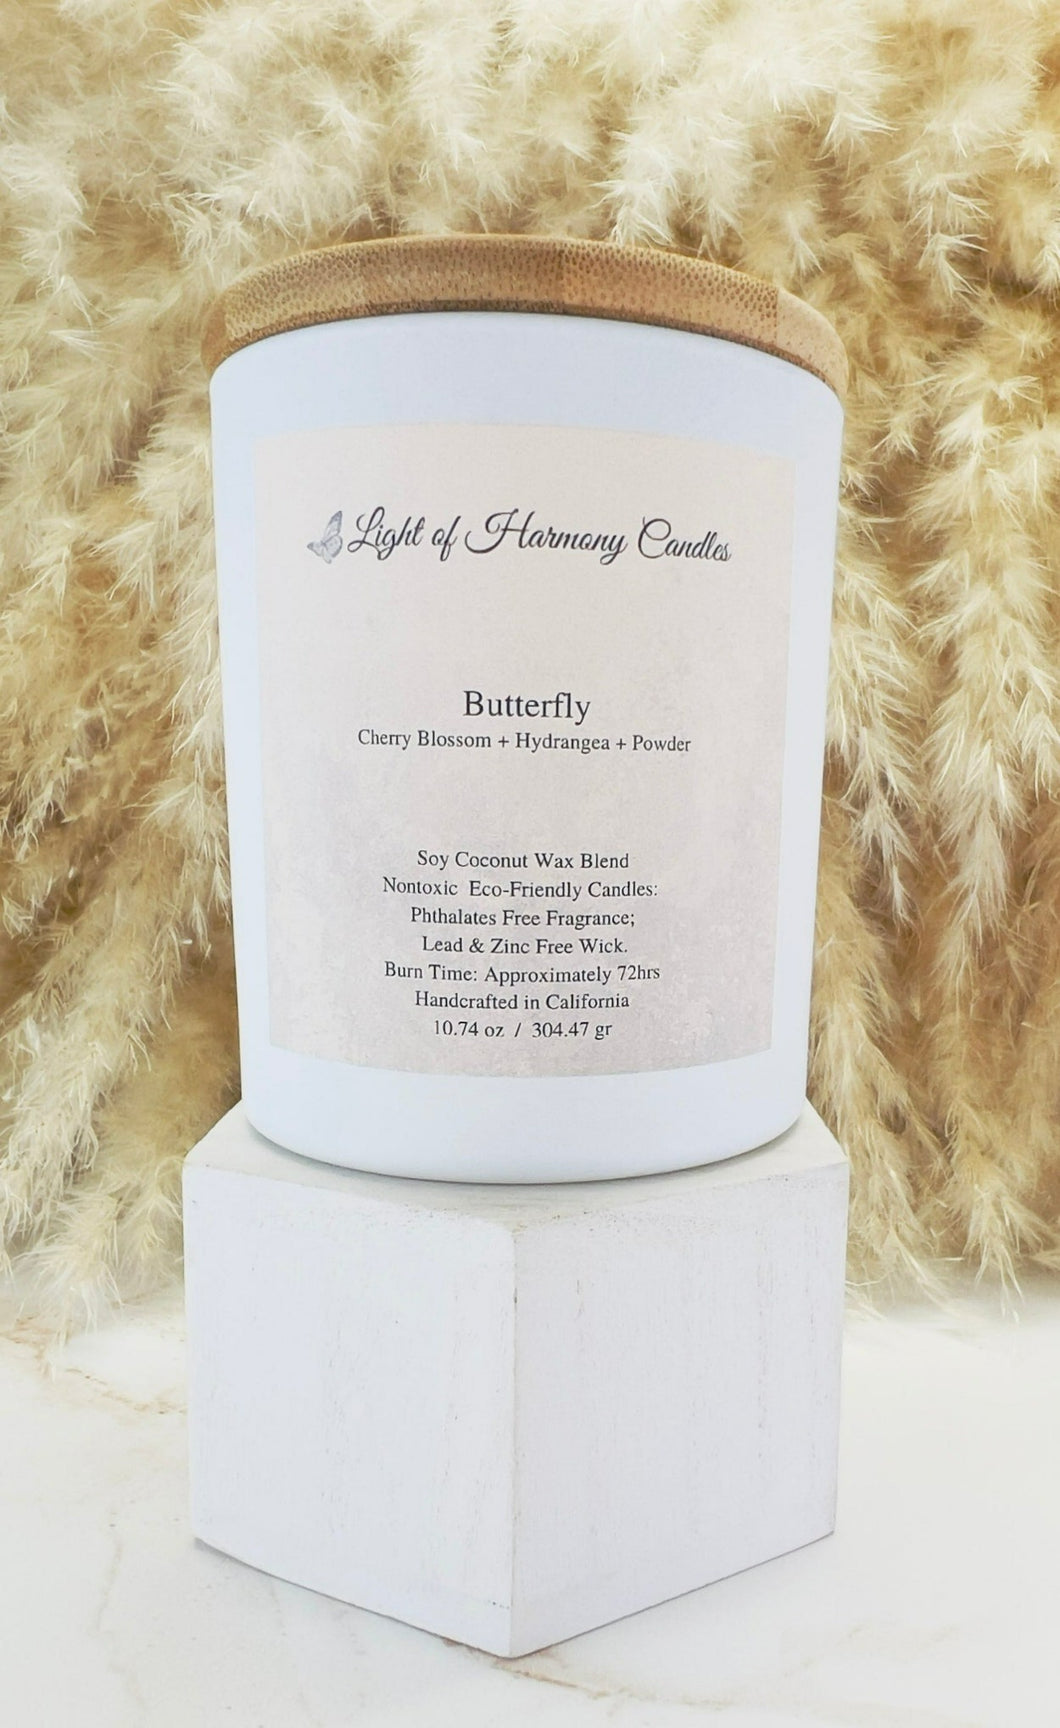 #cherryblossom #hydrangea #powder #candle #Butterfly #floralfragrance #floralscentcandle  #ecofriendly #nontoxiccandle